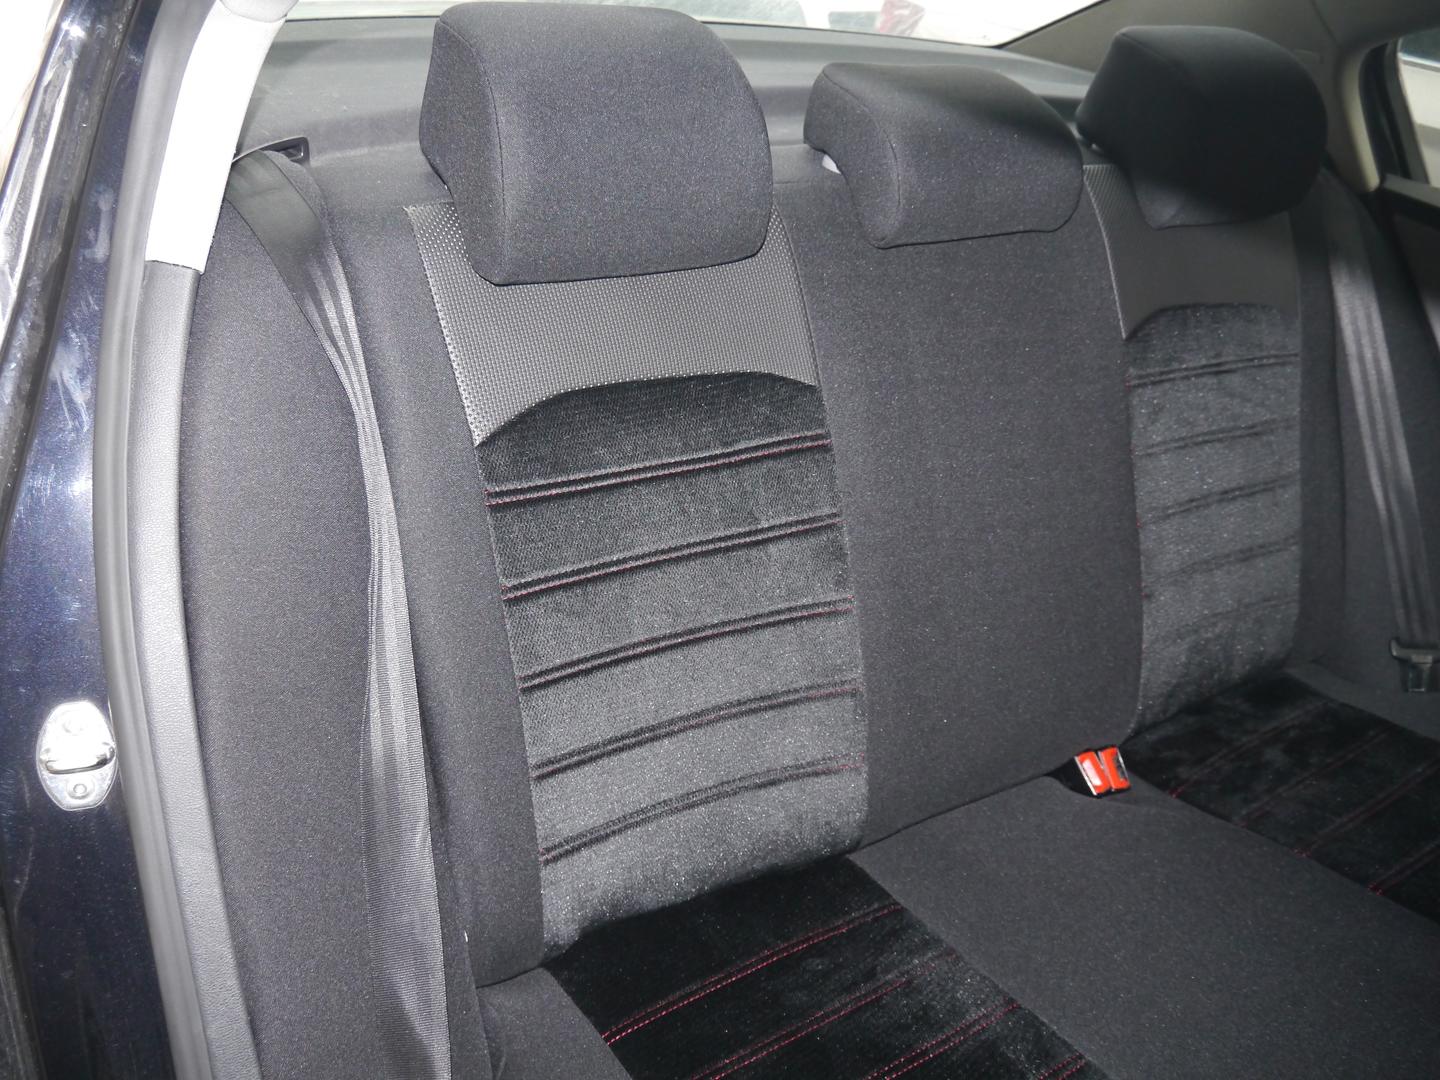 Car Seat Covers Protectors For Vw Golf Mk7 Estate No4a - Genuine Vw Golf Seat Covers